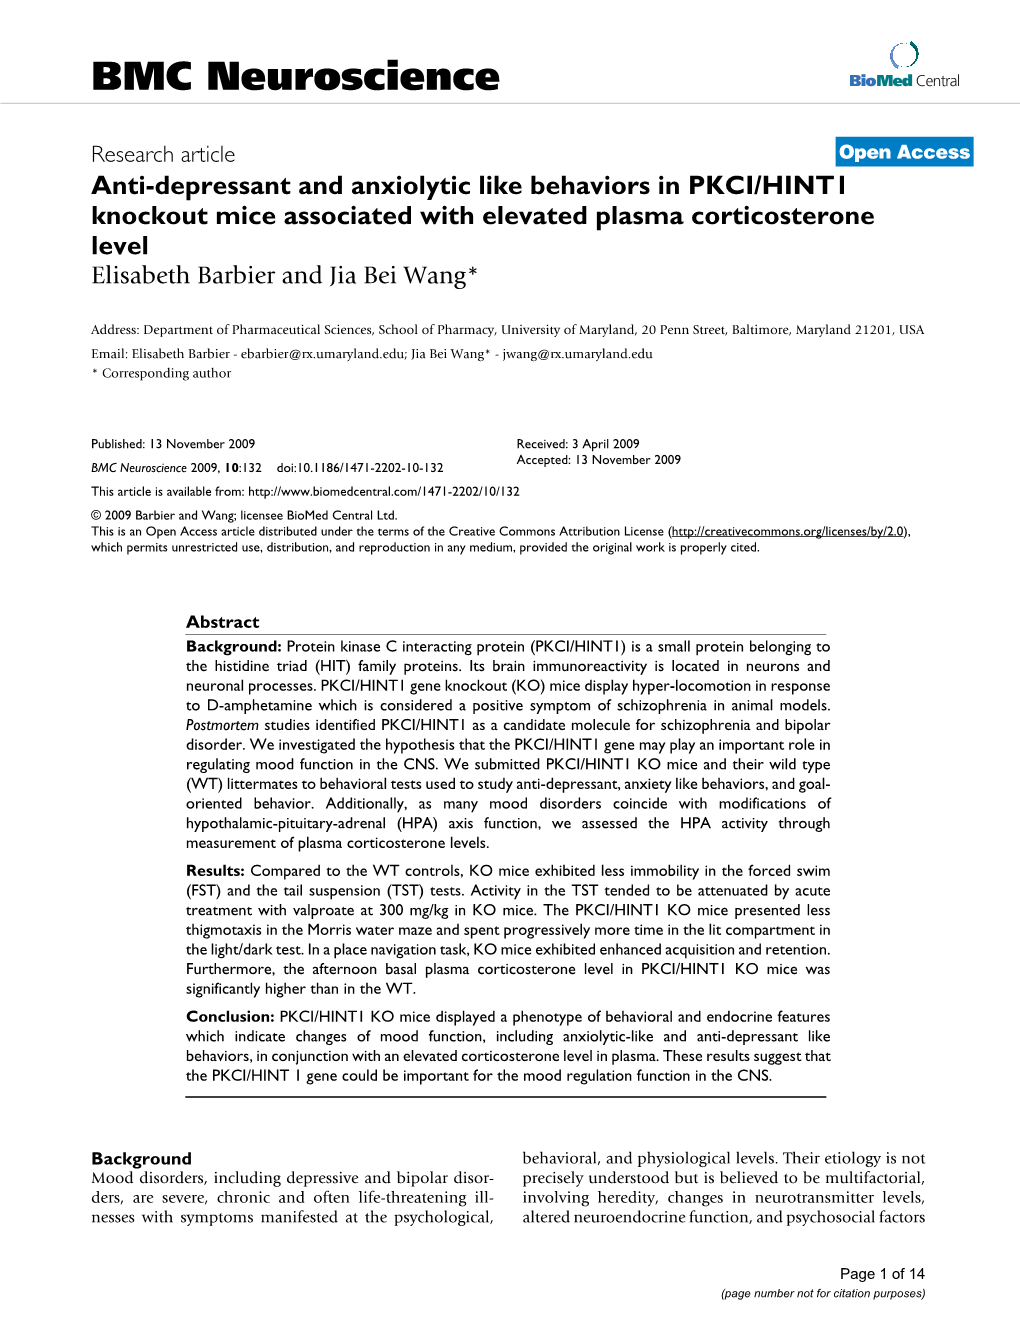 Anti-Depressant and Anxiolytic Like Behaviors in PKCI/HINT1 Knockout Mice Associated with Elevated Plasma Corticosterone Level Elisabeth Barbier and Jia Bei Wang*